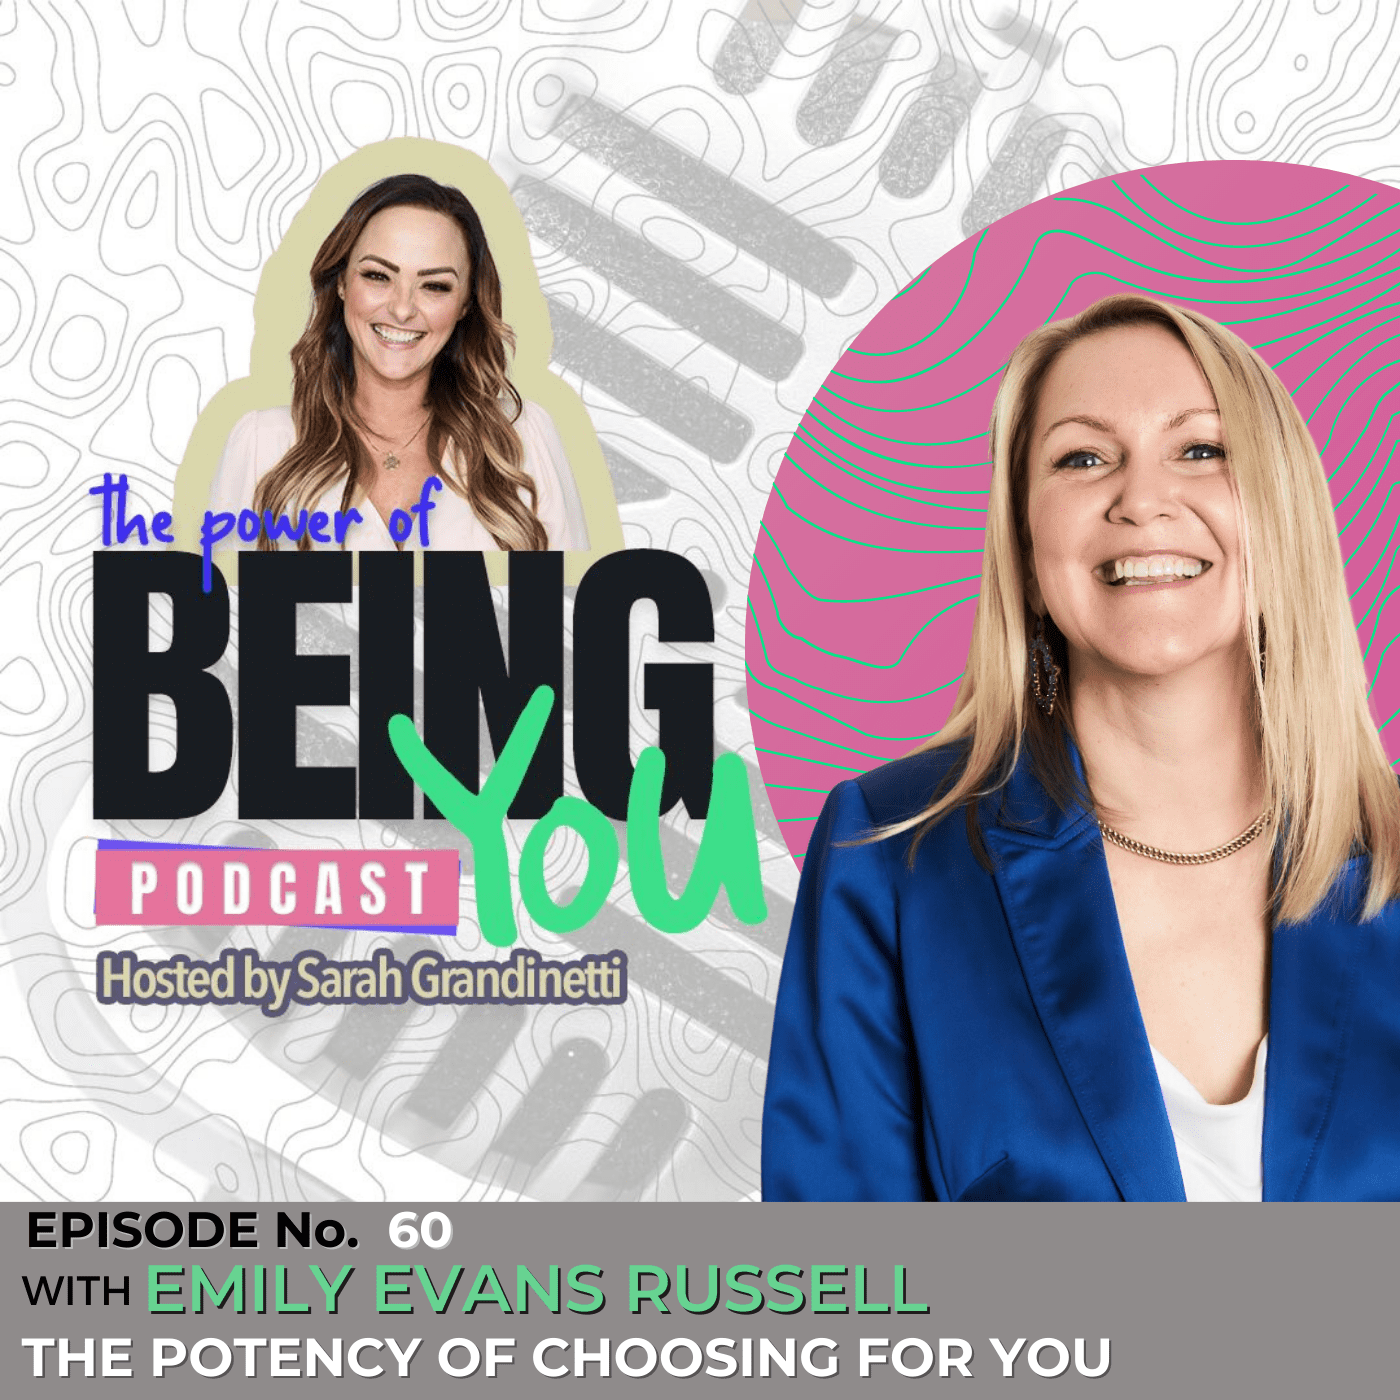 Episode 60 - The Potency of Choosing for You